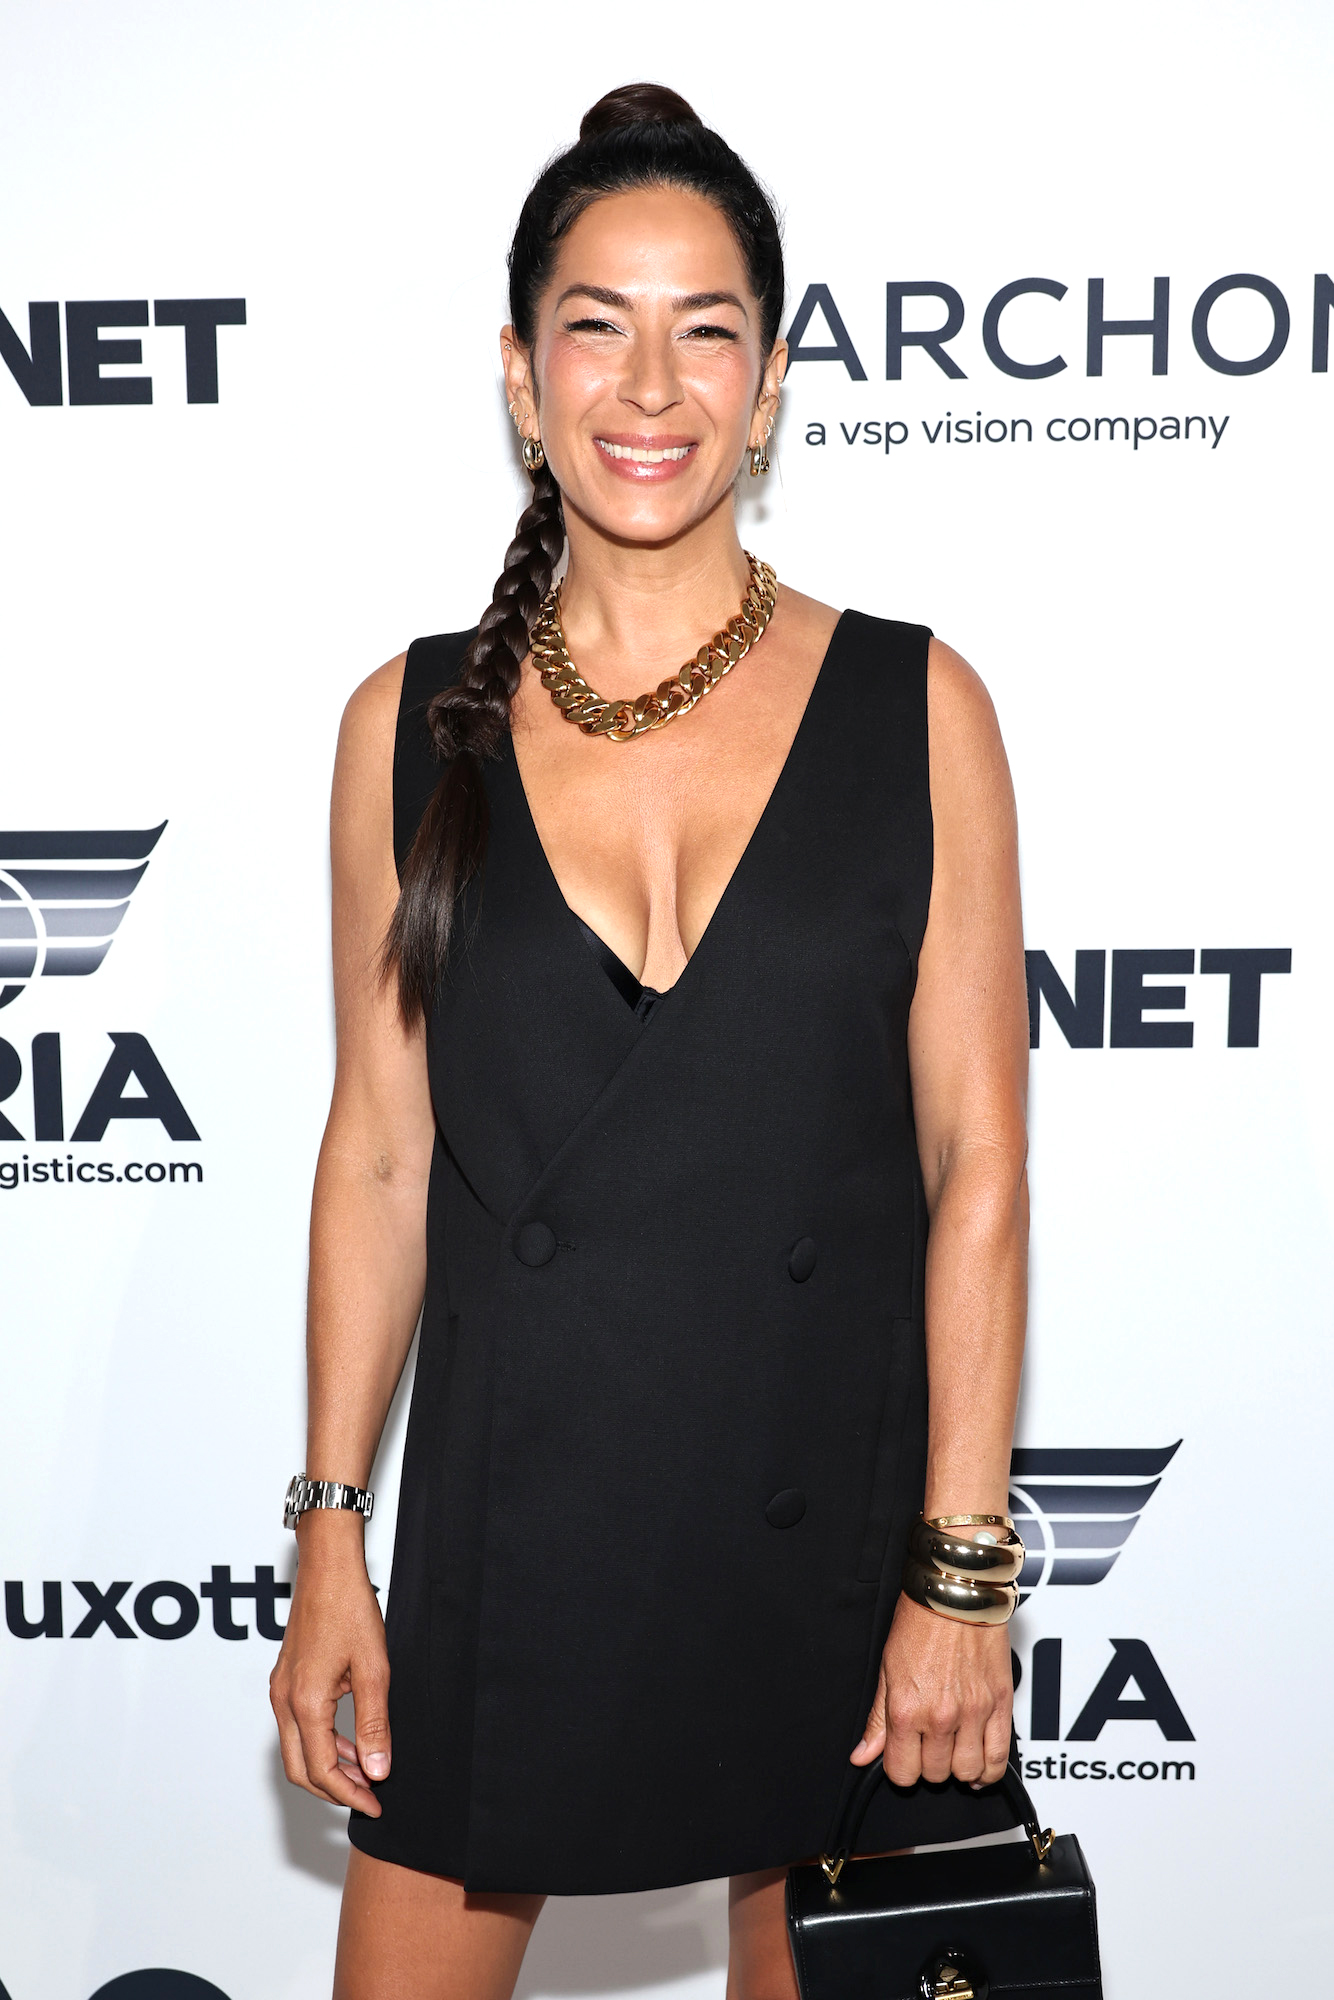 Rebecca Minkoff Hints at What She'd Want 'RHONY' Fans to See From Her